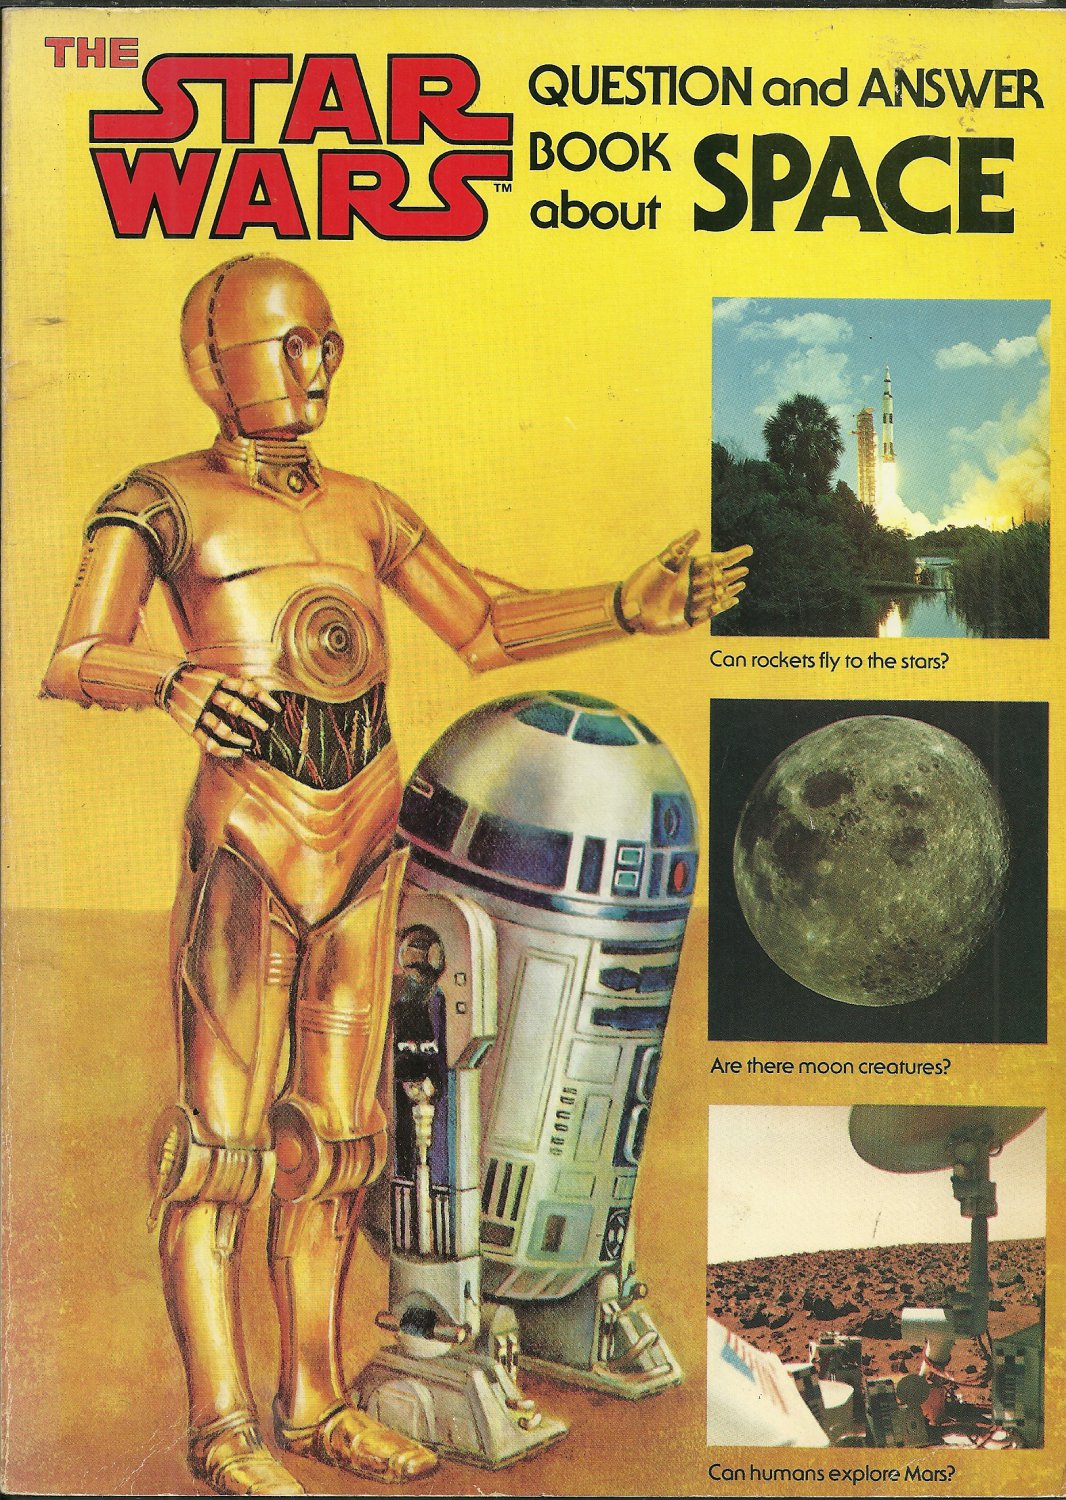 The STAR WARS Questions and Answer Book About Space 1979 by Diana L. Moche